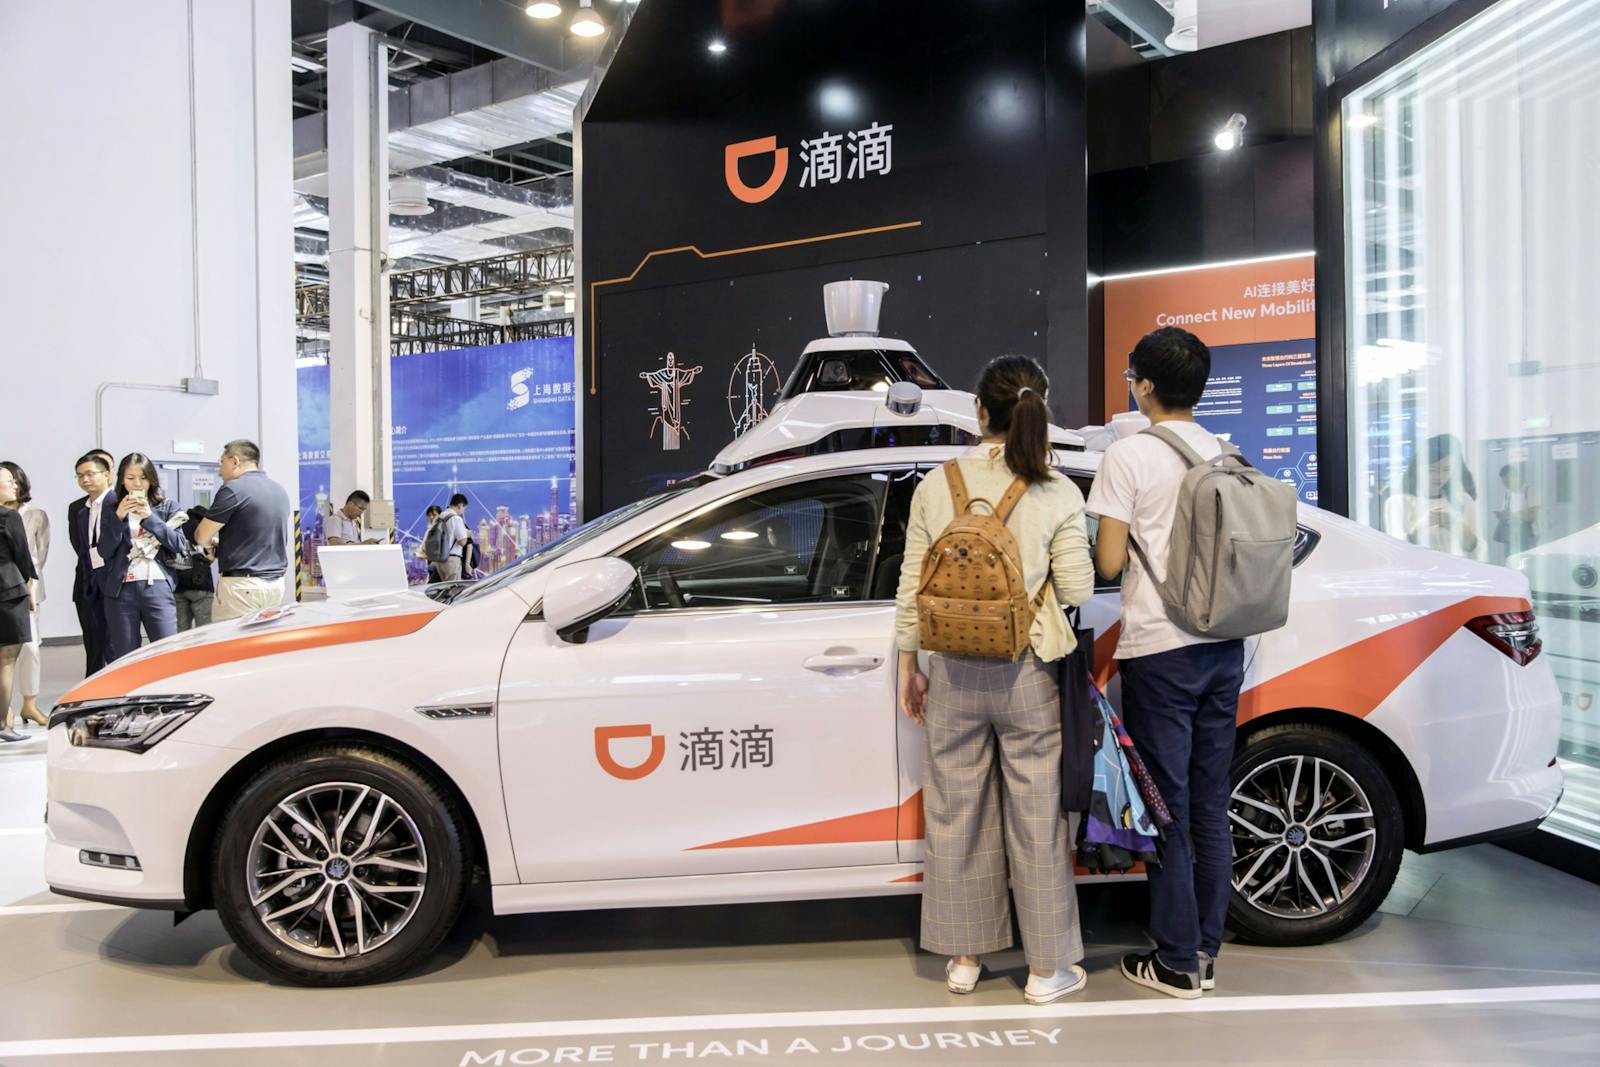 A Didi Chuxing autonomous car on display in 2019. Photo by Bloomberg.